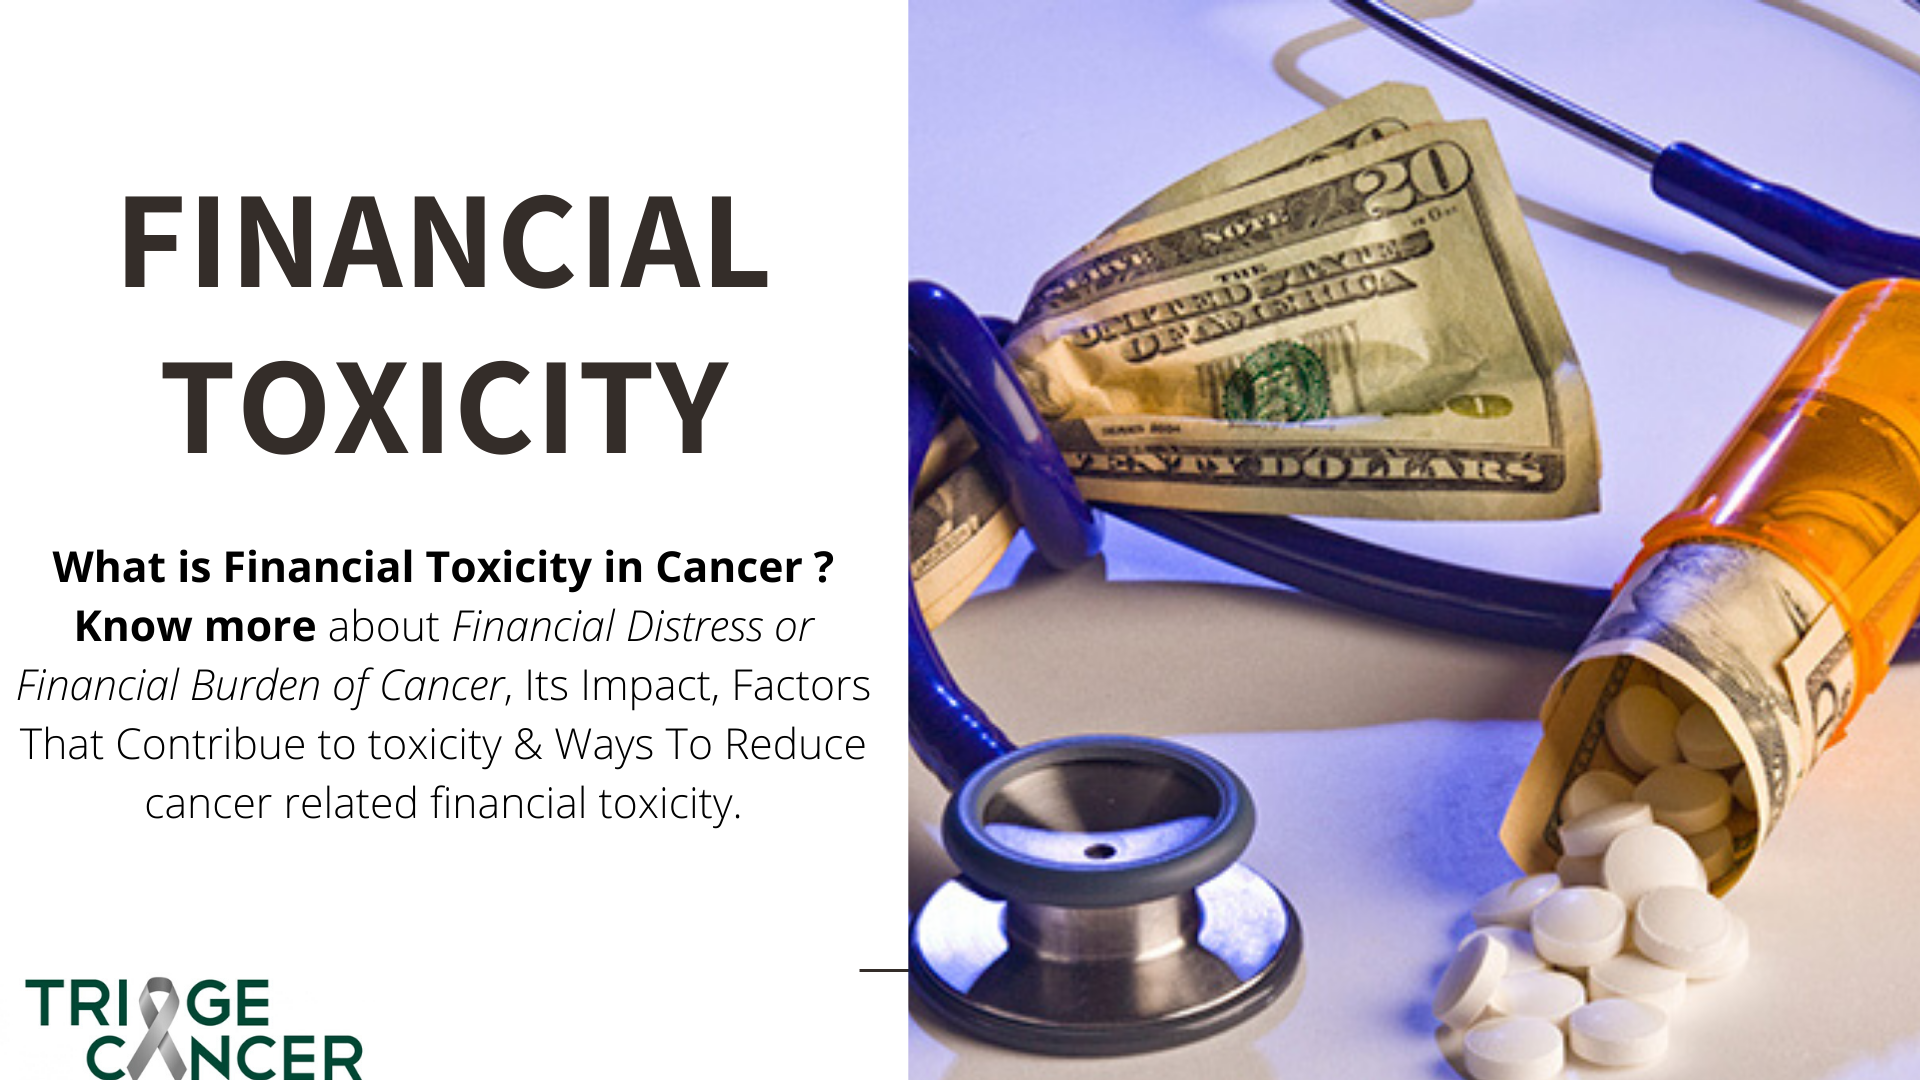 financial toxicity in cancer patients - cancer treatment toxicity or financial burden